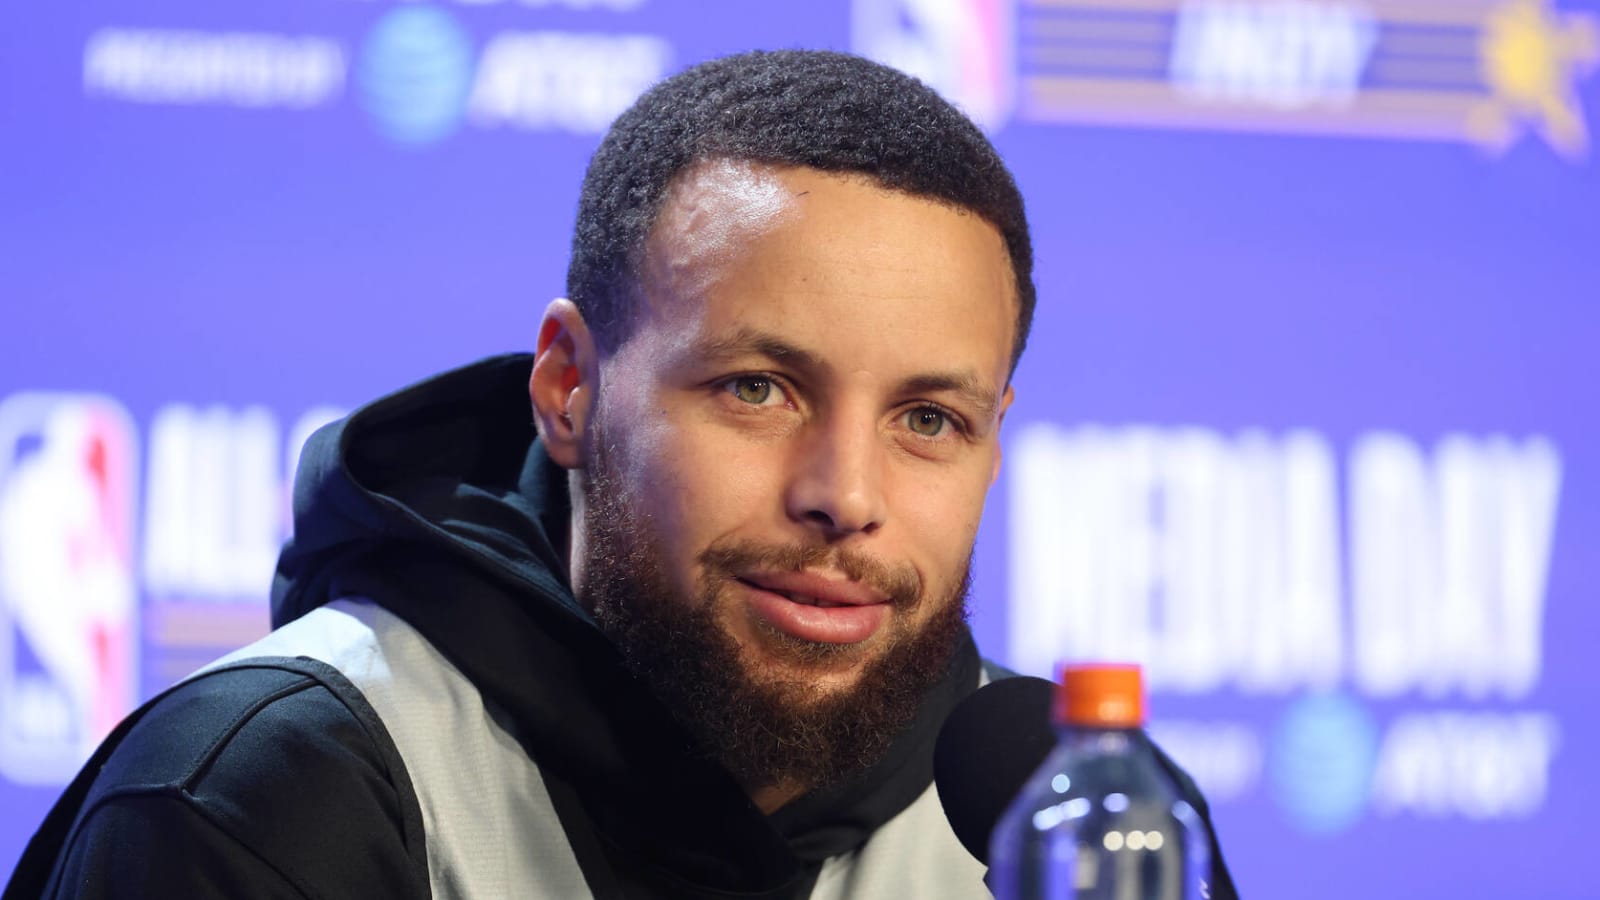 Stephen Curry has a humorous reaction to criticism